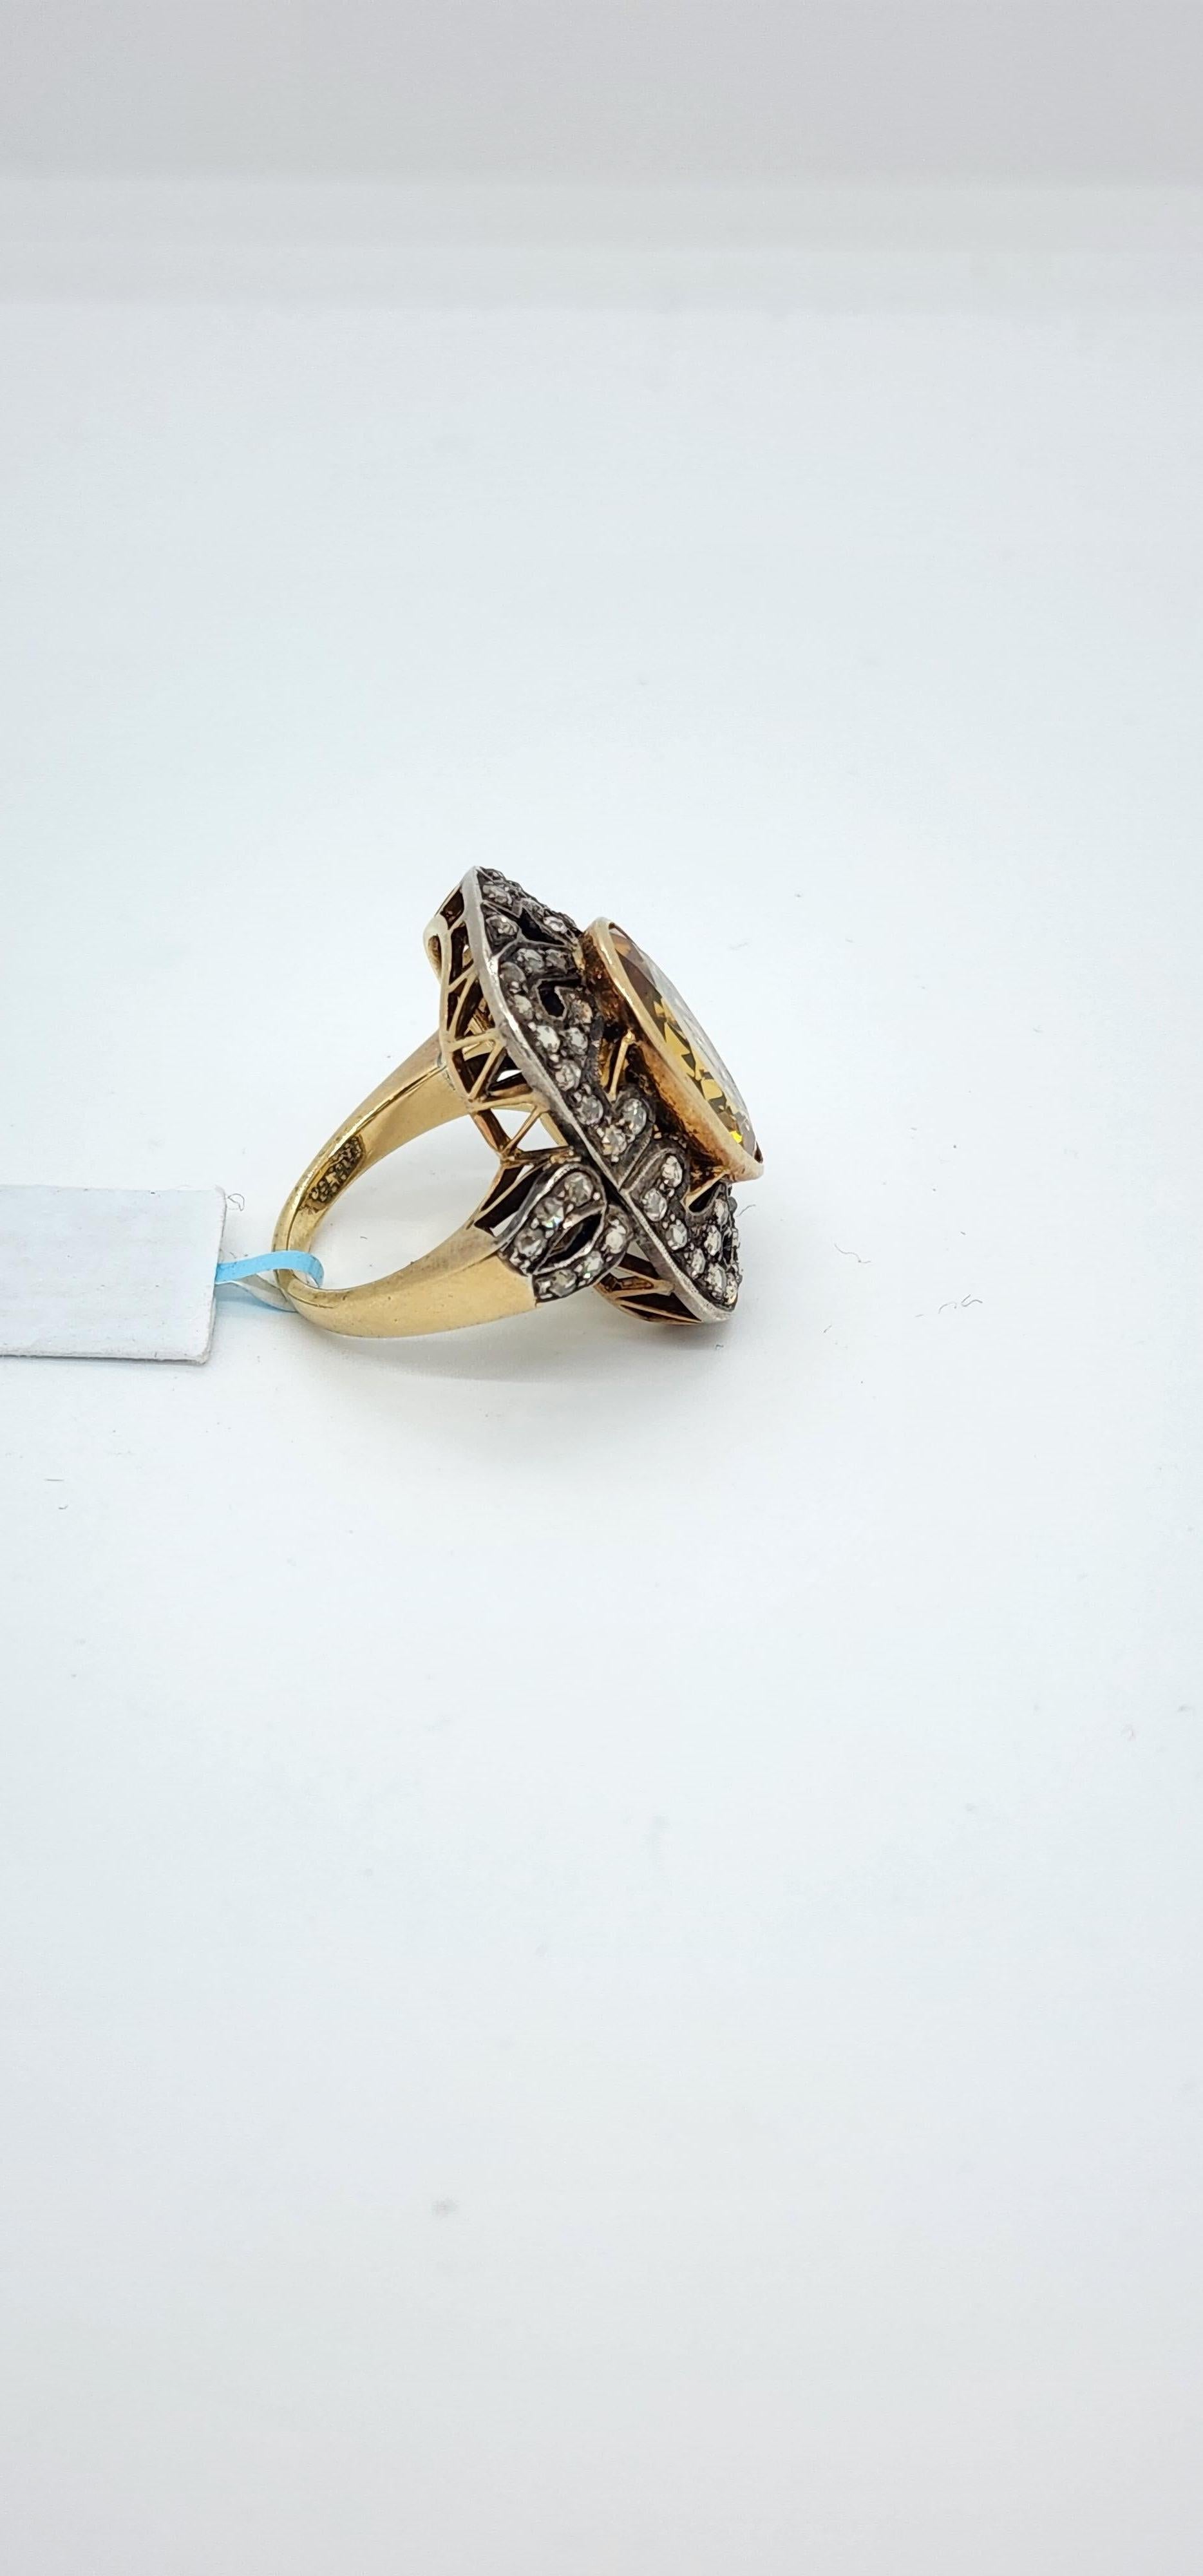  Citrine and Diamond Rose Cut Cocktail Ring in 14k and Black Rhodium In Excellent Condition For Sale In Los Angeles, CA